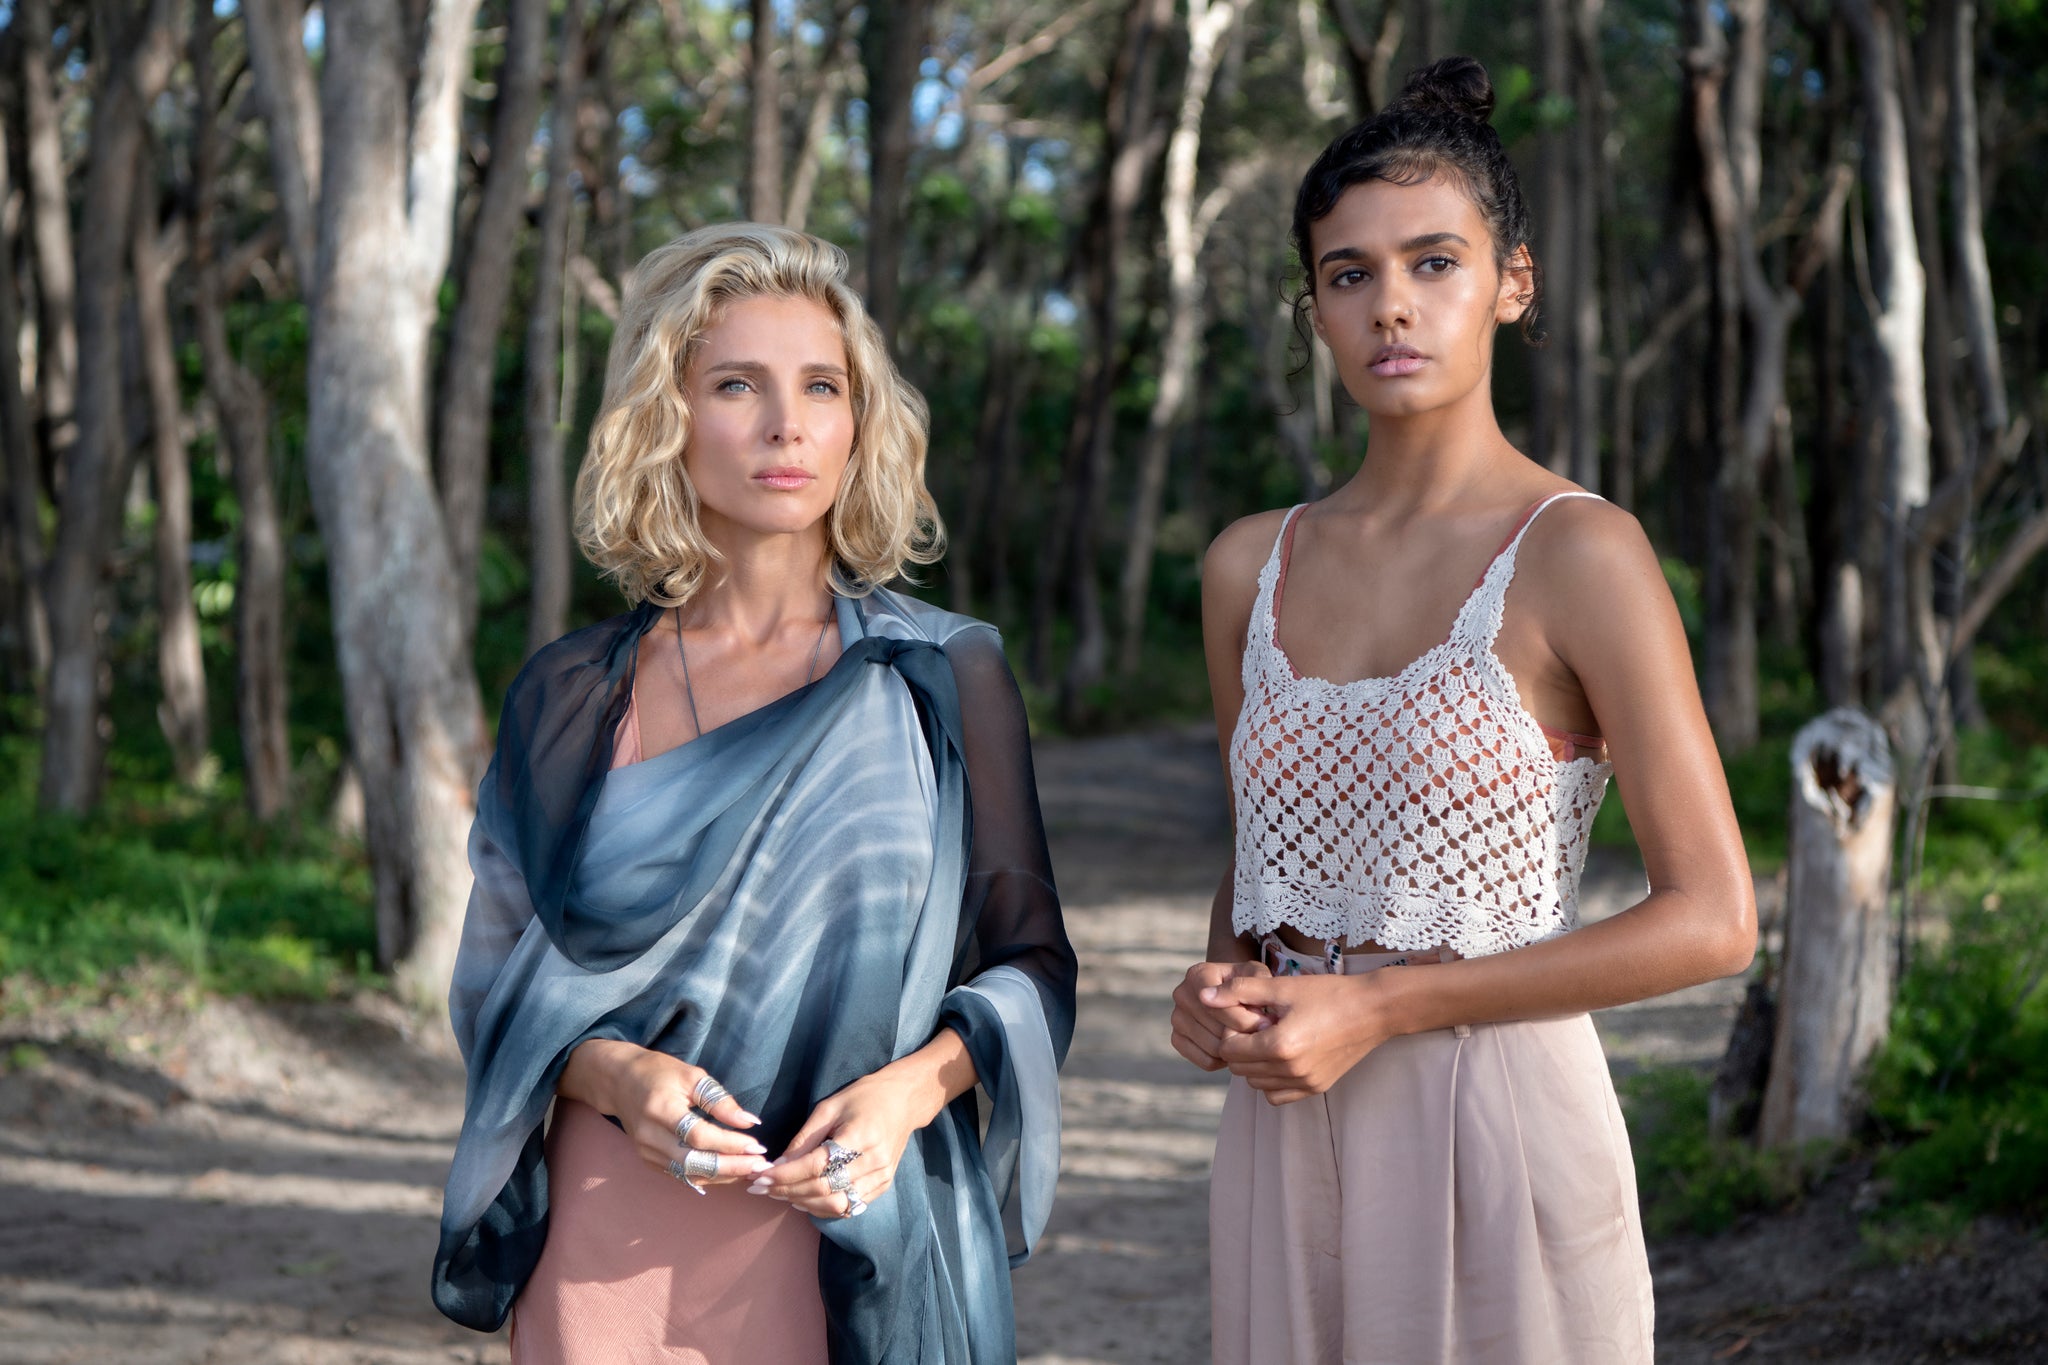 Madeleine Madden starred in Tidelands with Fast and the Furious star and wife of Chris Hemsworth, Elsa Pataky.